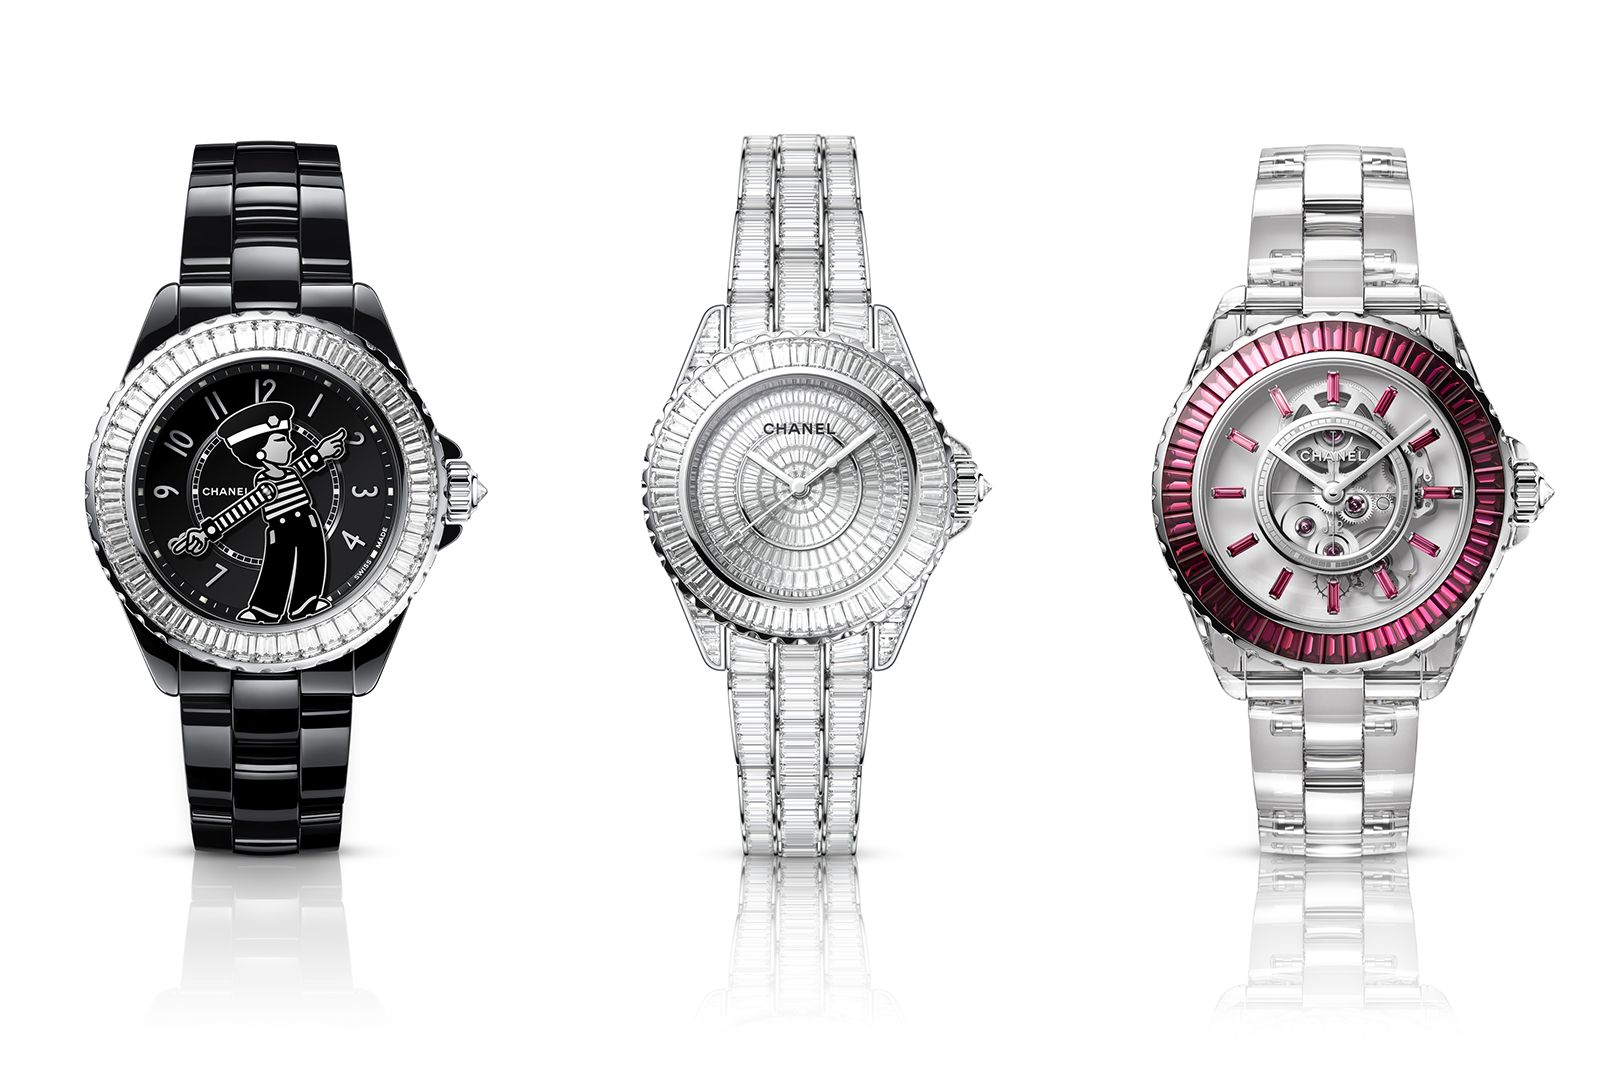 Chanel J12 timepieces, including (from left to right) the Mademoiselle J12 XS, the J12 Baguette Diamond Star and the J12 Xray Red Edition